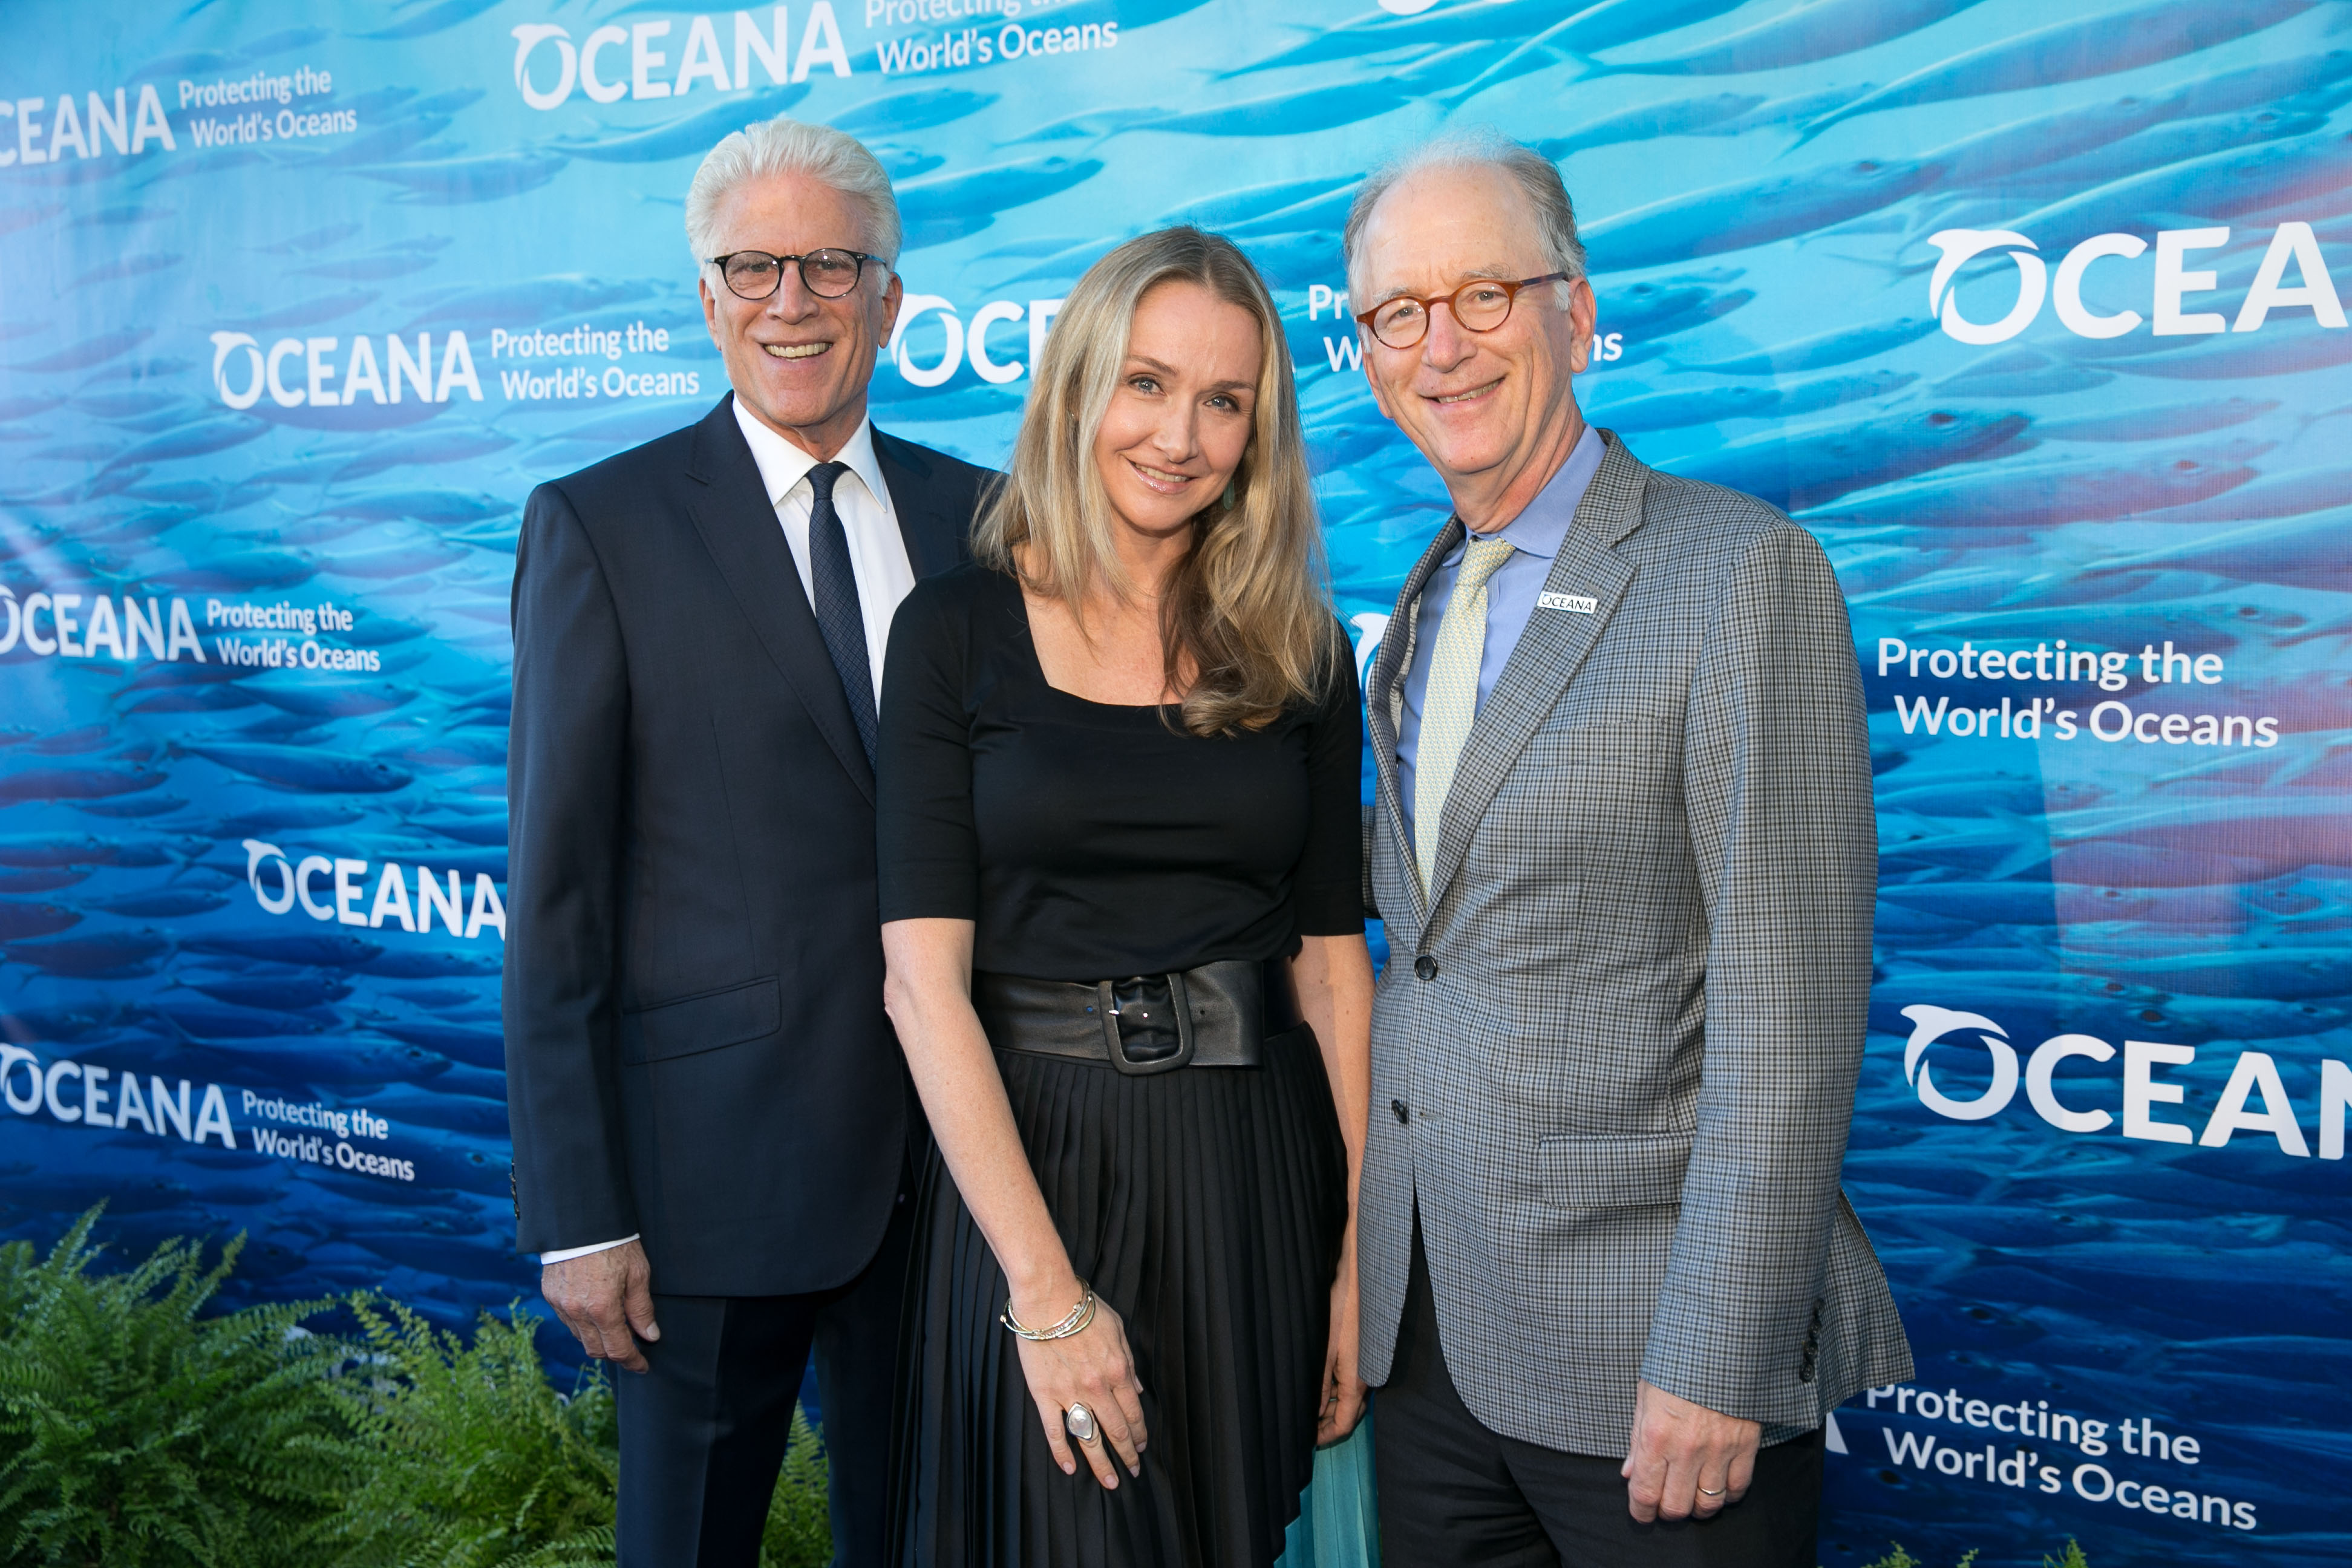 SeaChange emcees Ted Danson and Alexandra Cousteau with Oceana CEO Andy Sharpless
(C) Oceana/MOVI Inc